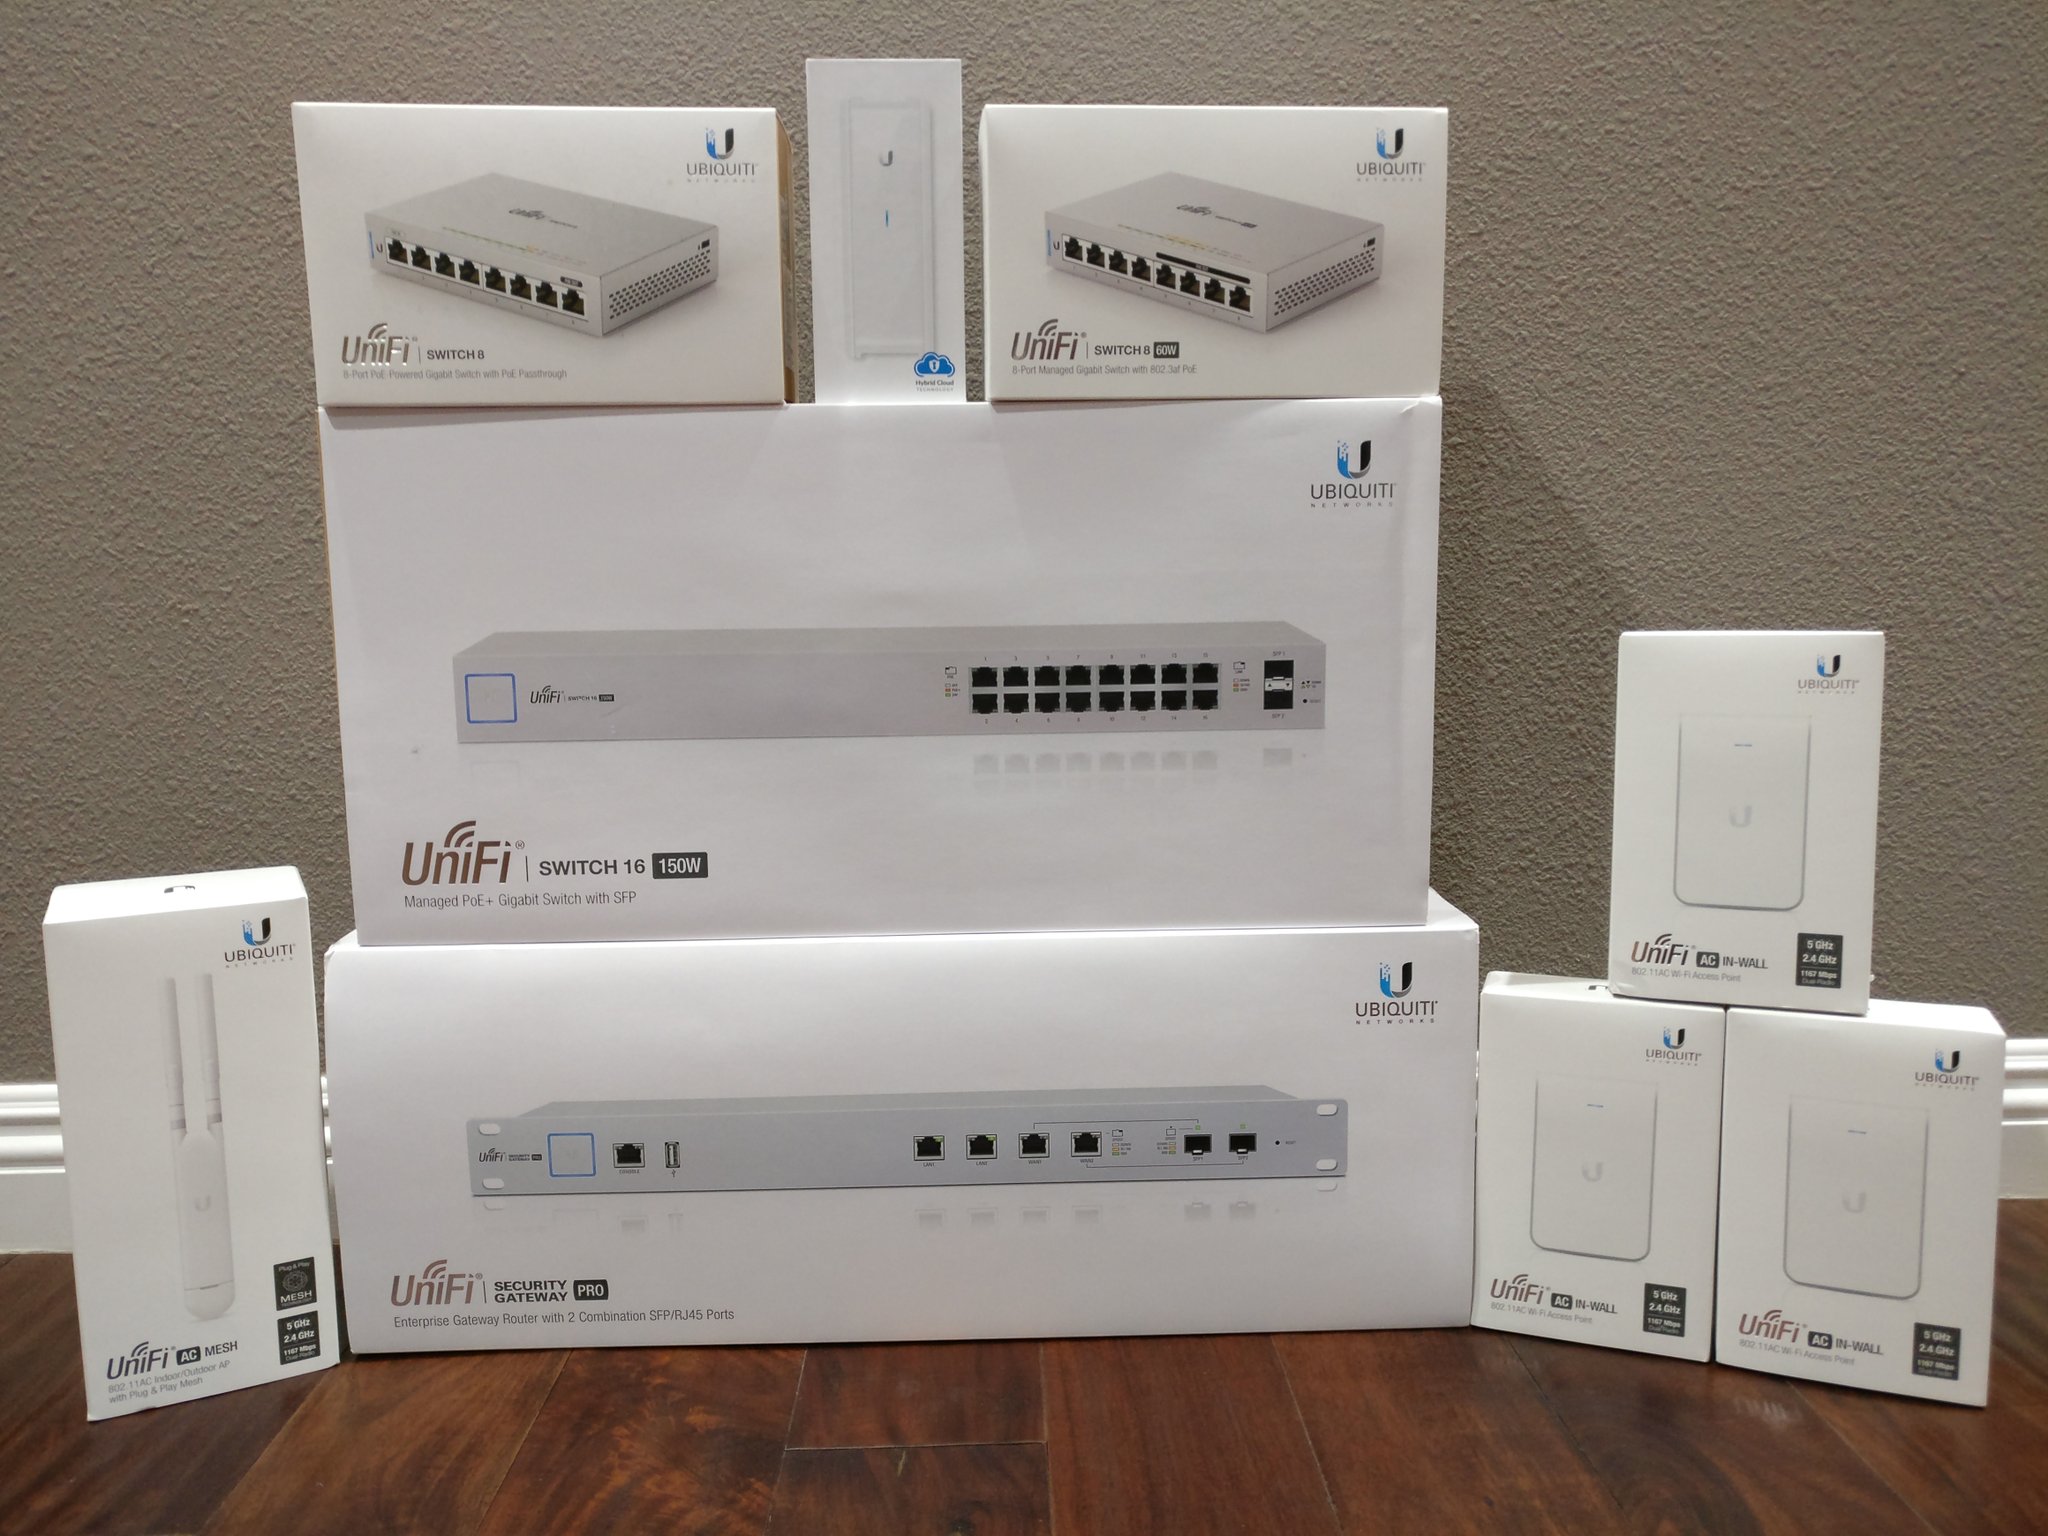 The Ubiquiti Diaries: A Site-to-Site VPN Story